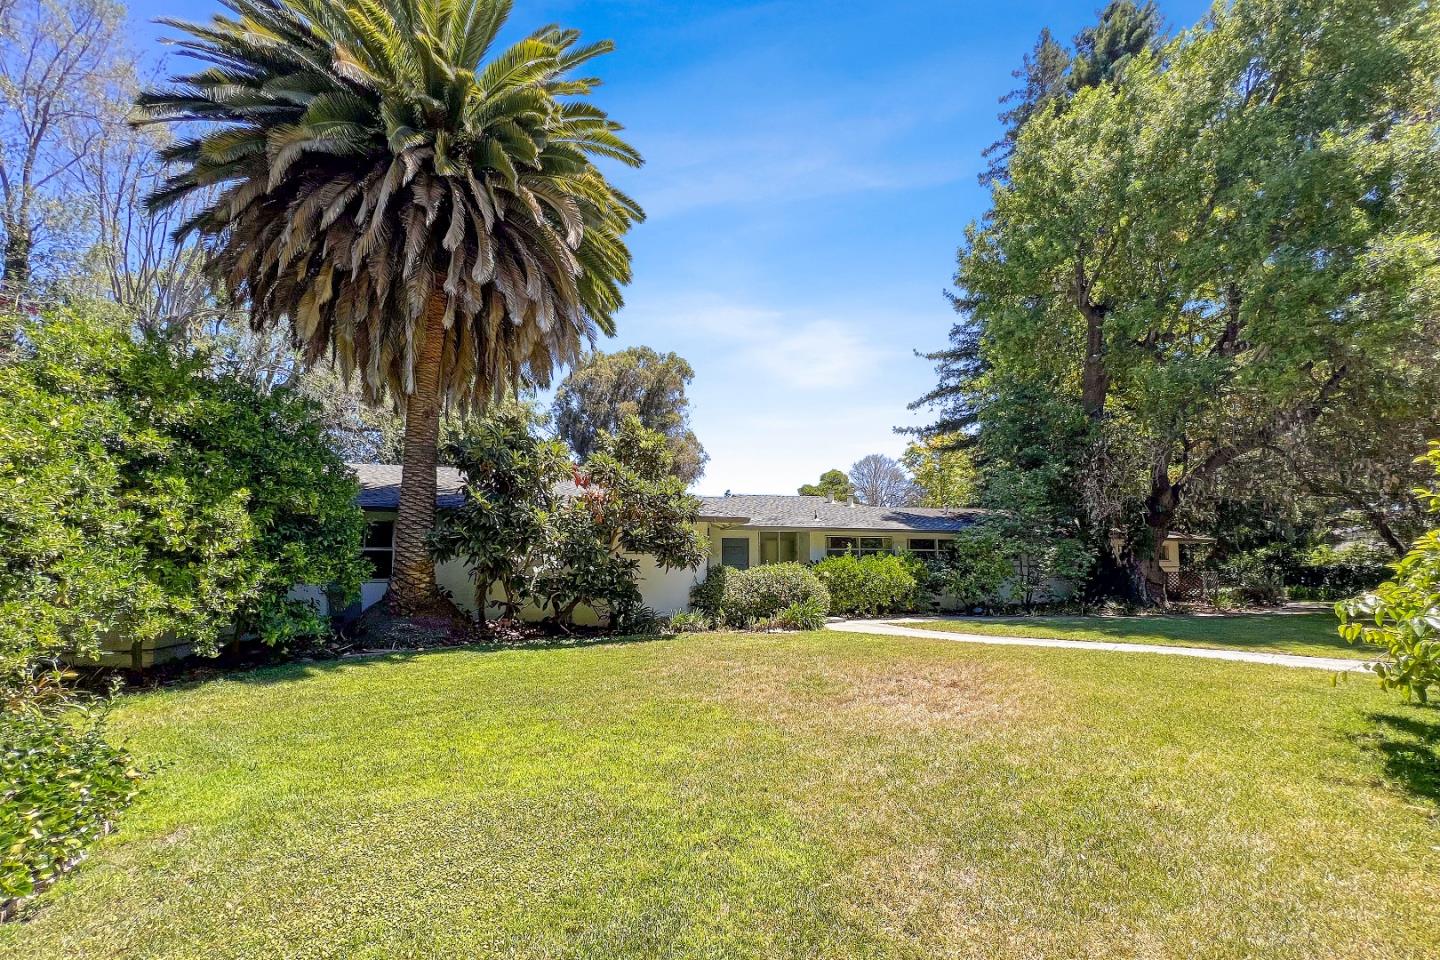 Build Your Dream Home - Being Sold for Land Value Only. Amazing Landscaped 42,164 +/- Lot in Beautiful Prime Lindenwood Location. Award Winning Menlo Park Schools!